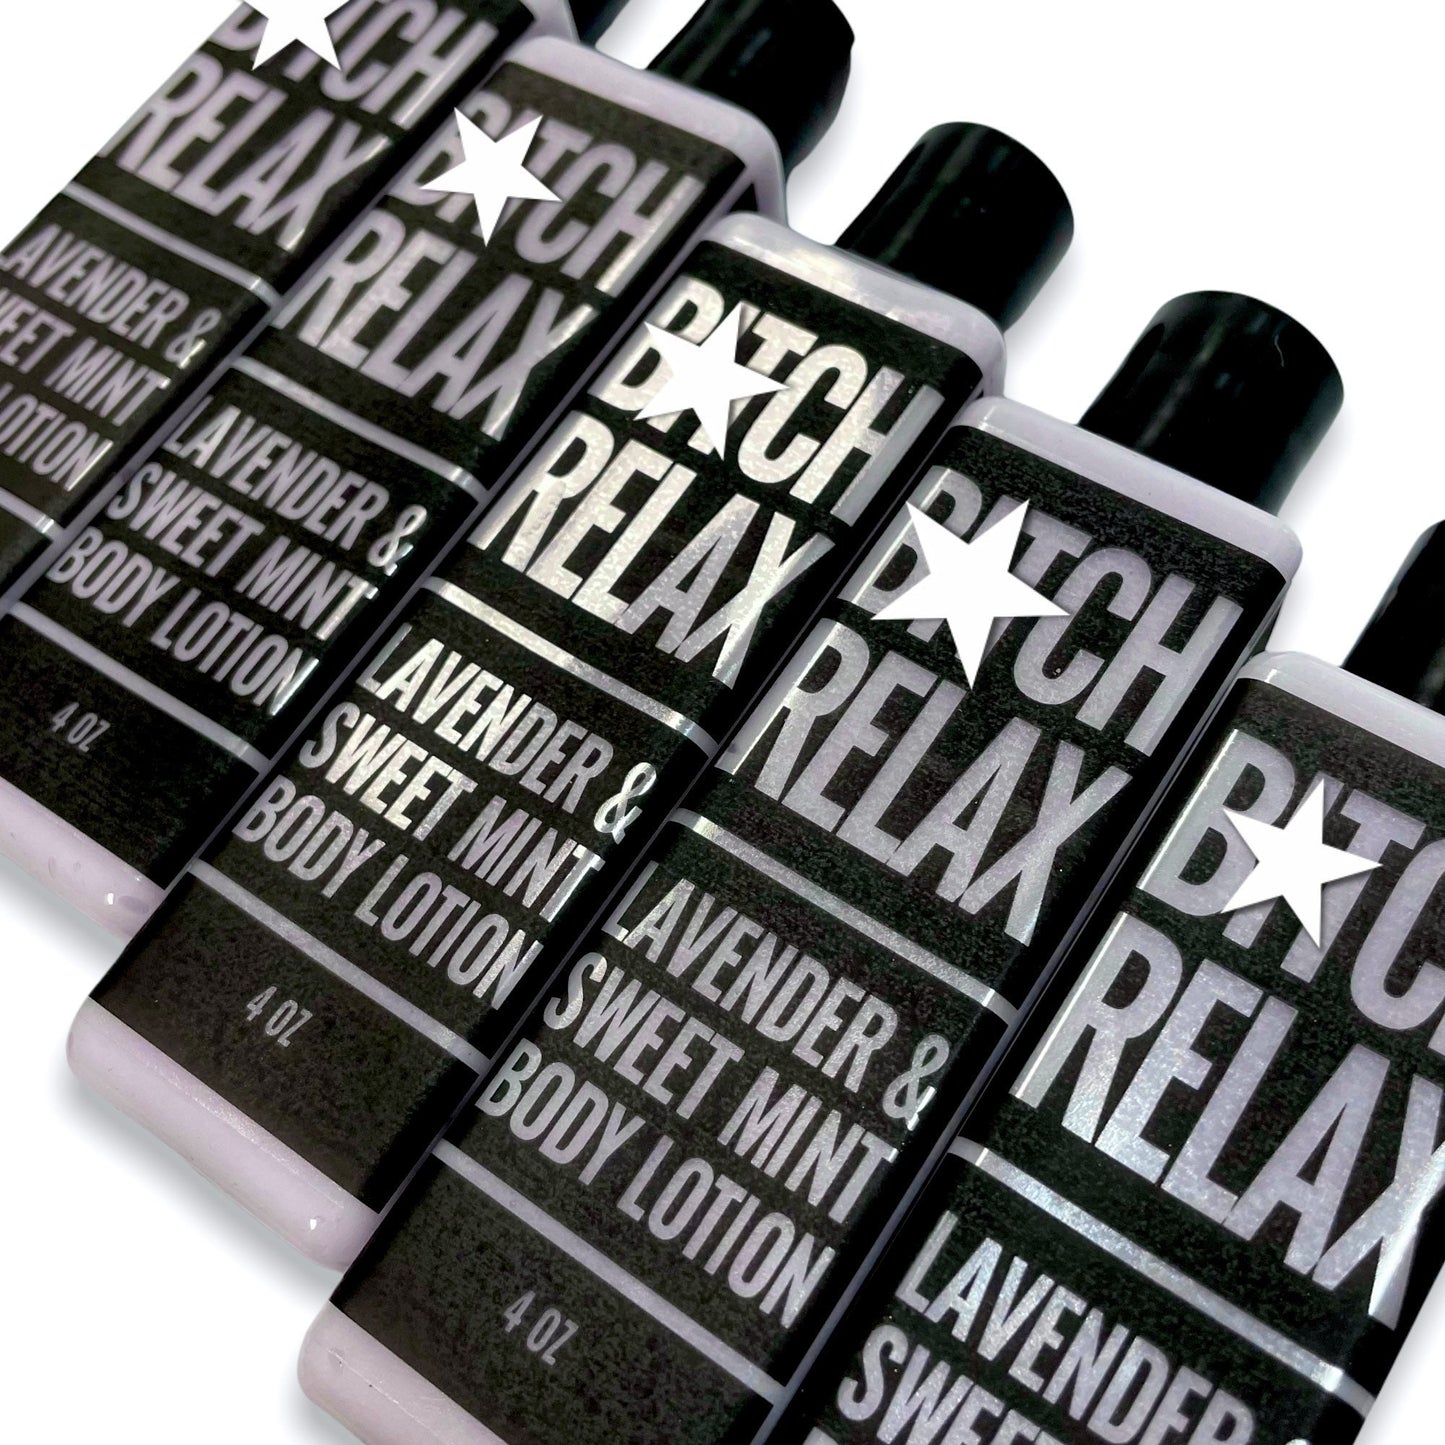 Bitch Relax Hand & Body Lotion